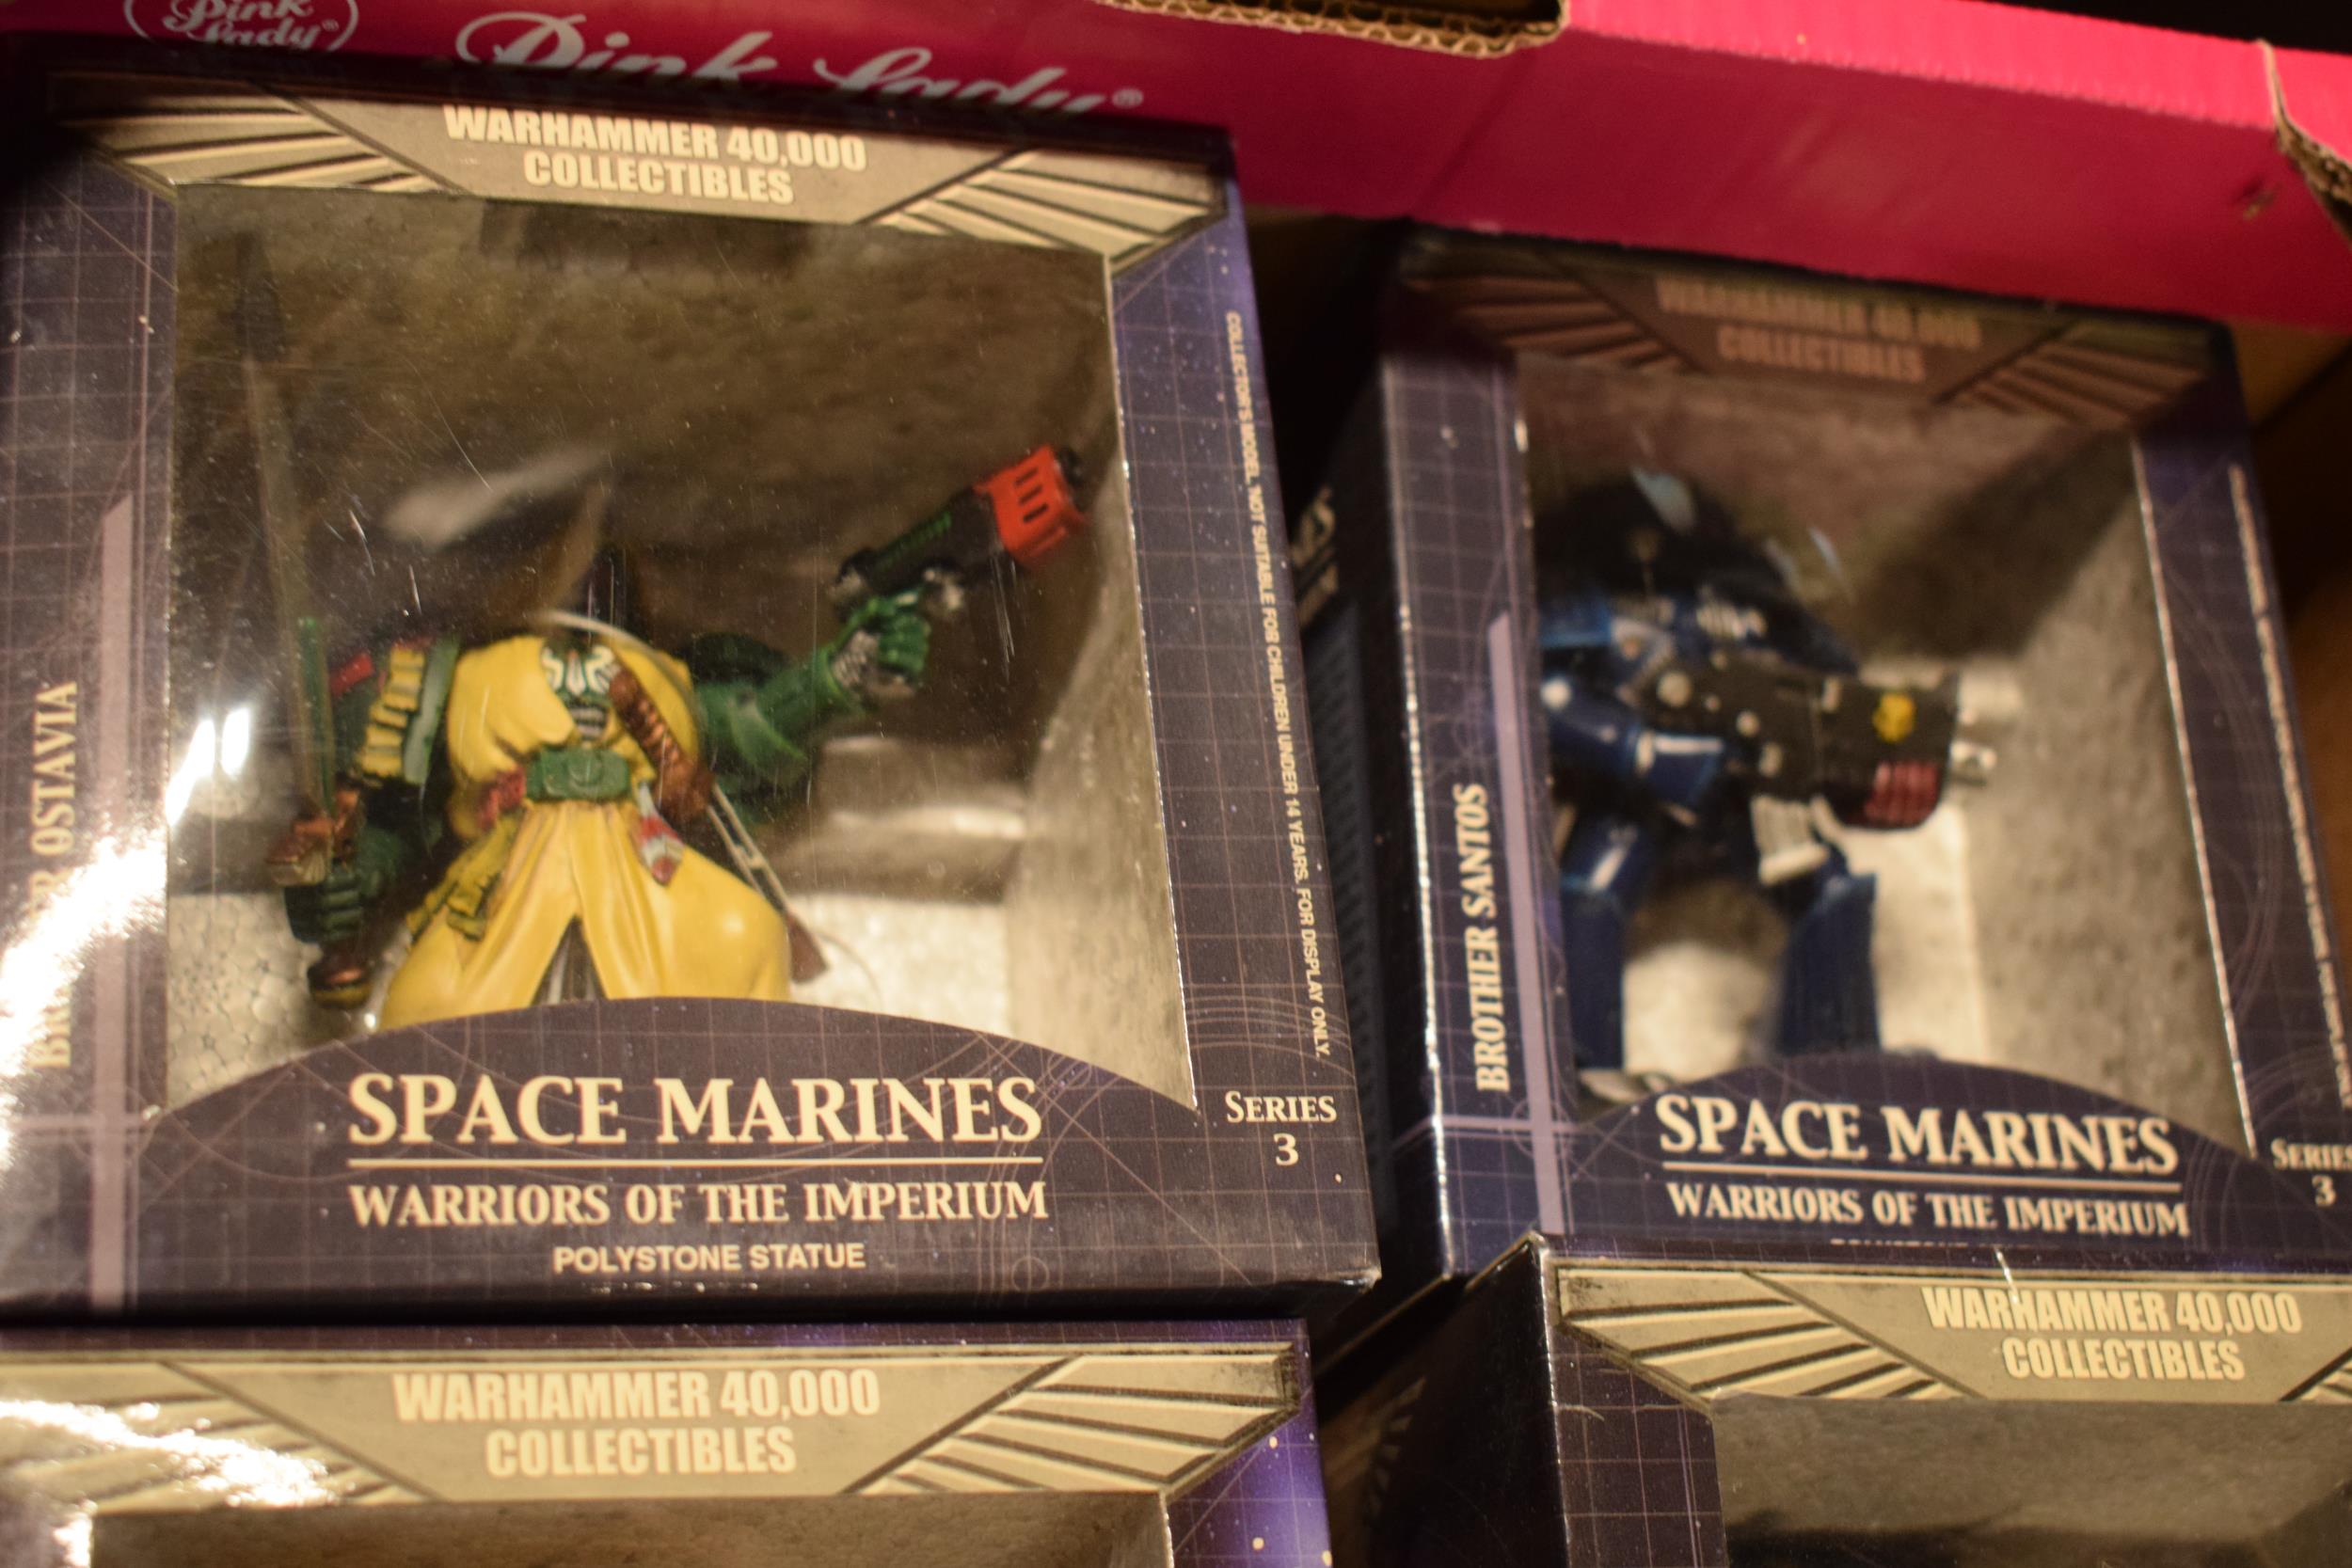 Warhammer 40,000 Collectibles to include Space Marines Warriers of the Imperium statues and a Fire - Image 5 of 5